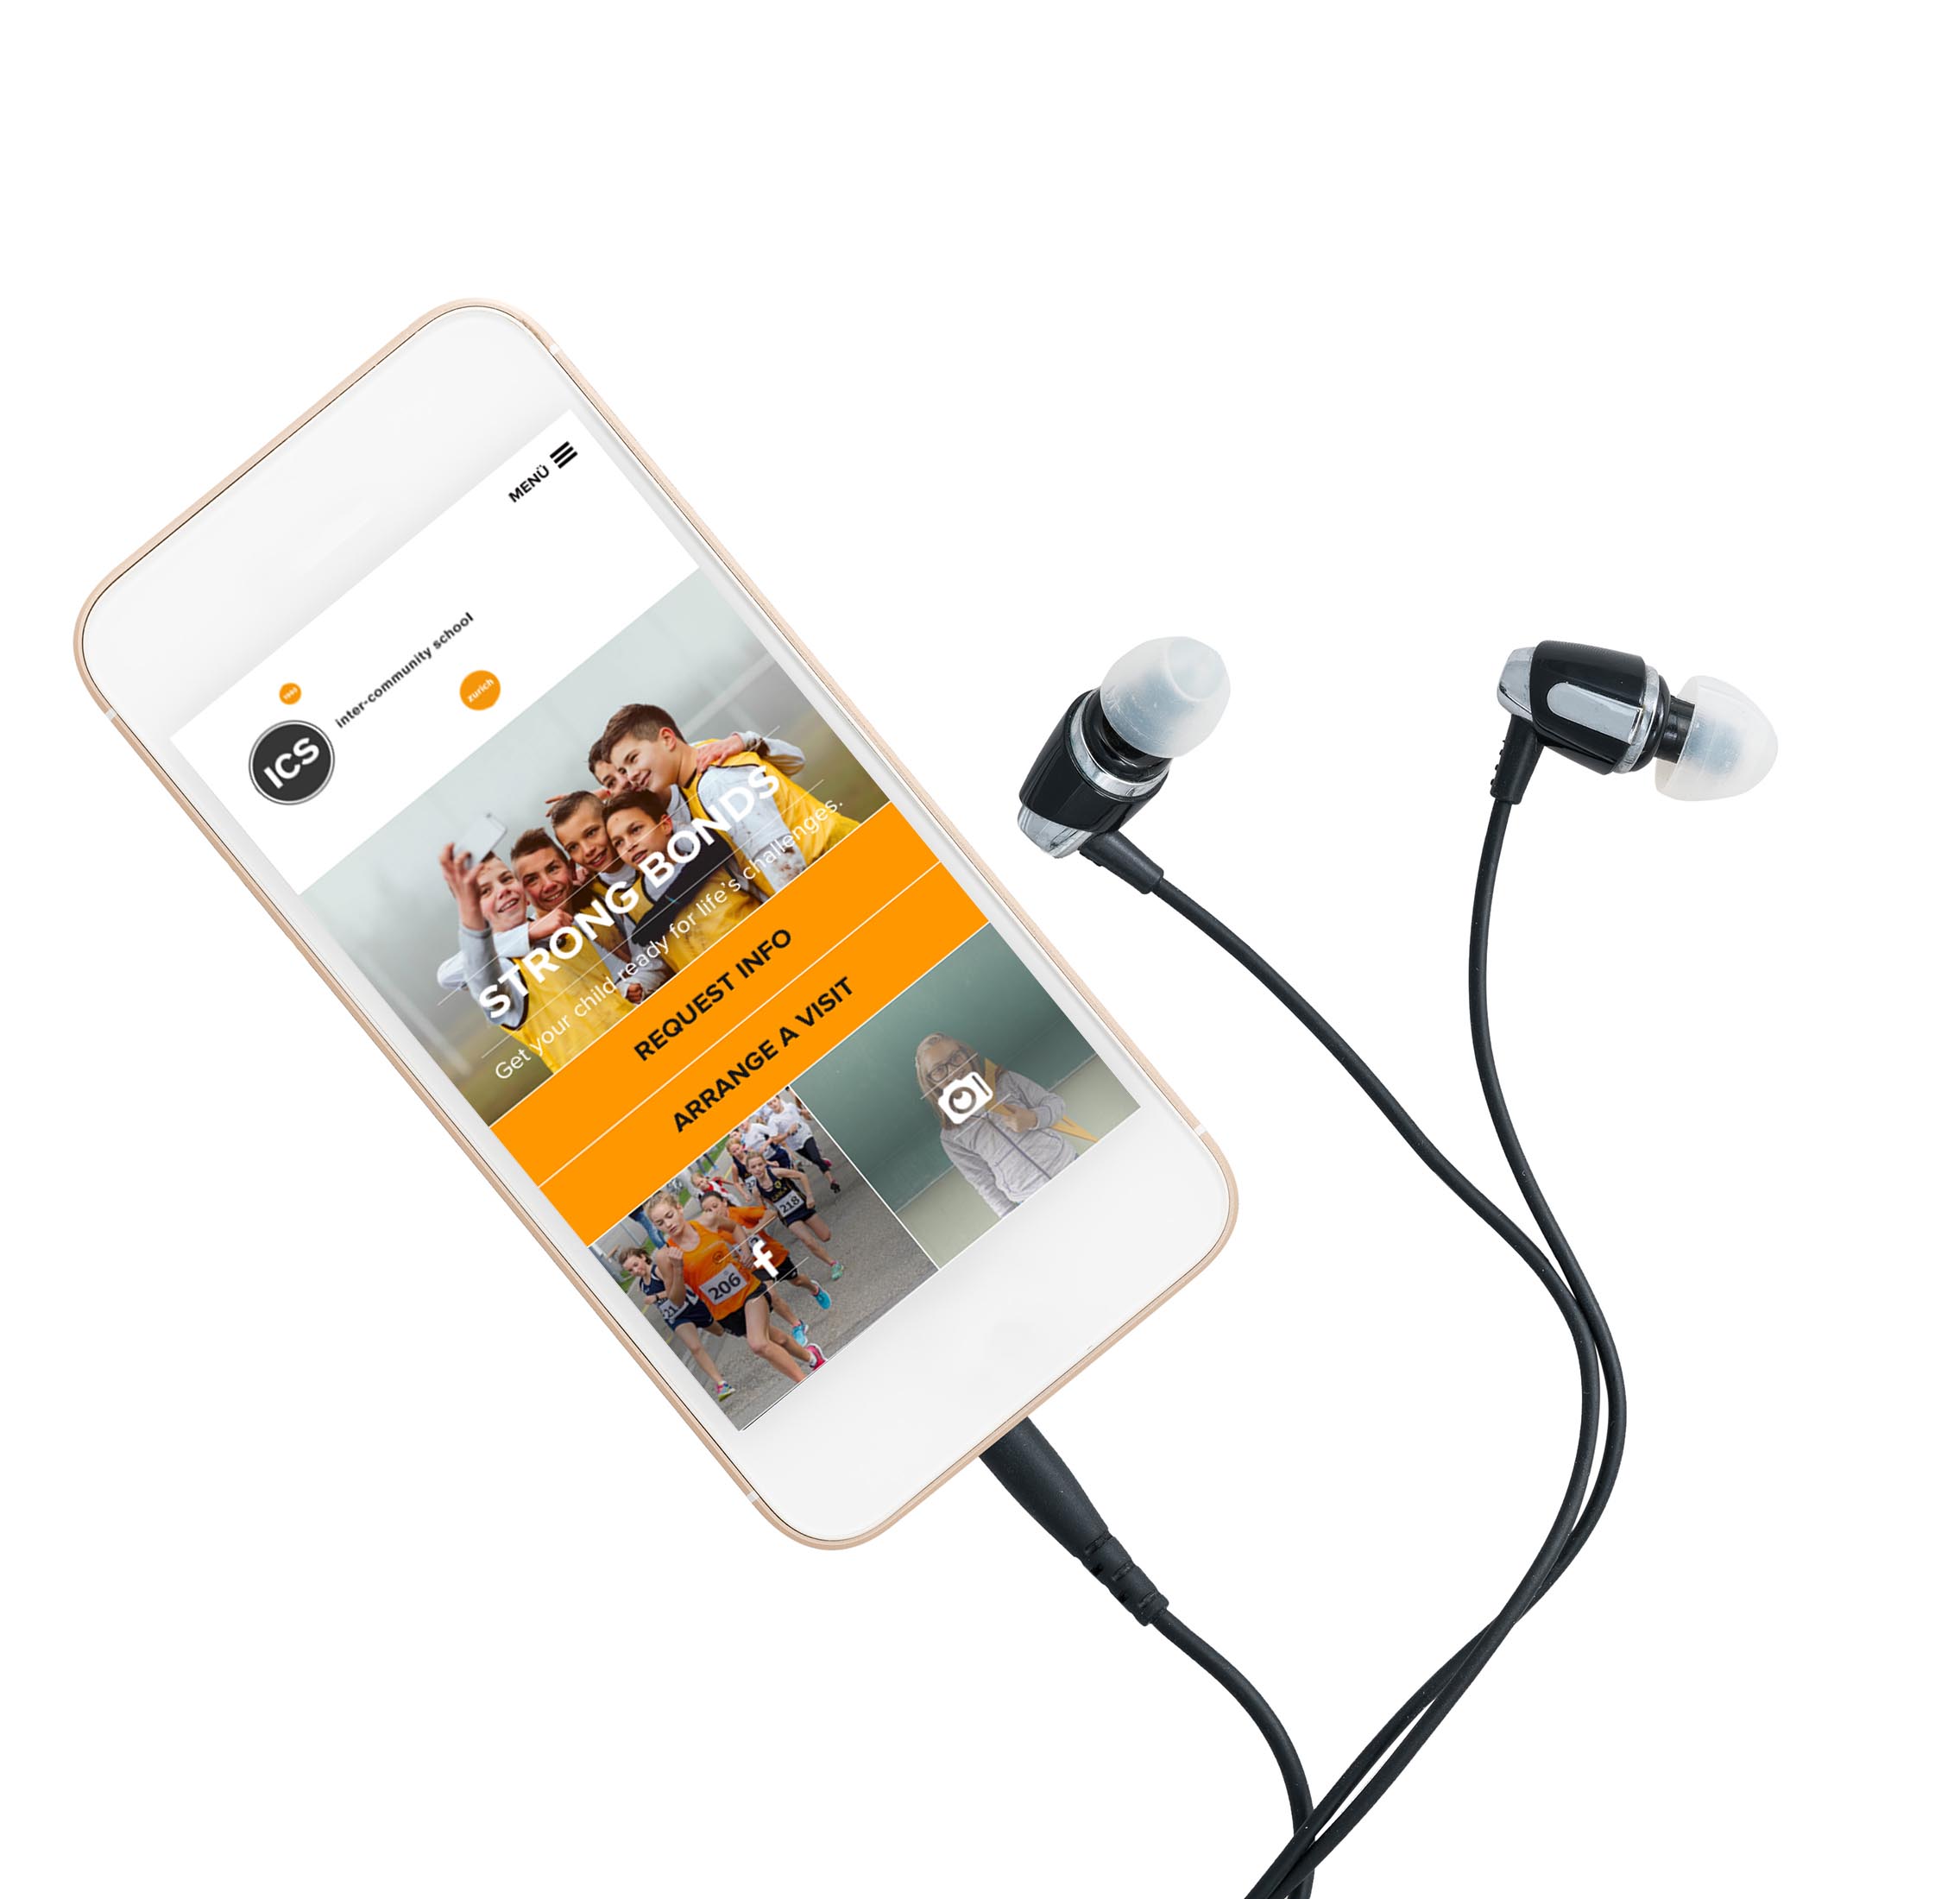 MP3 digital music player built into smartphone or mobile phone with earbuds isolated against a white background